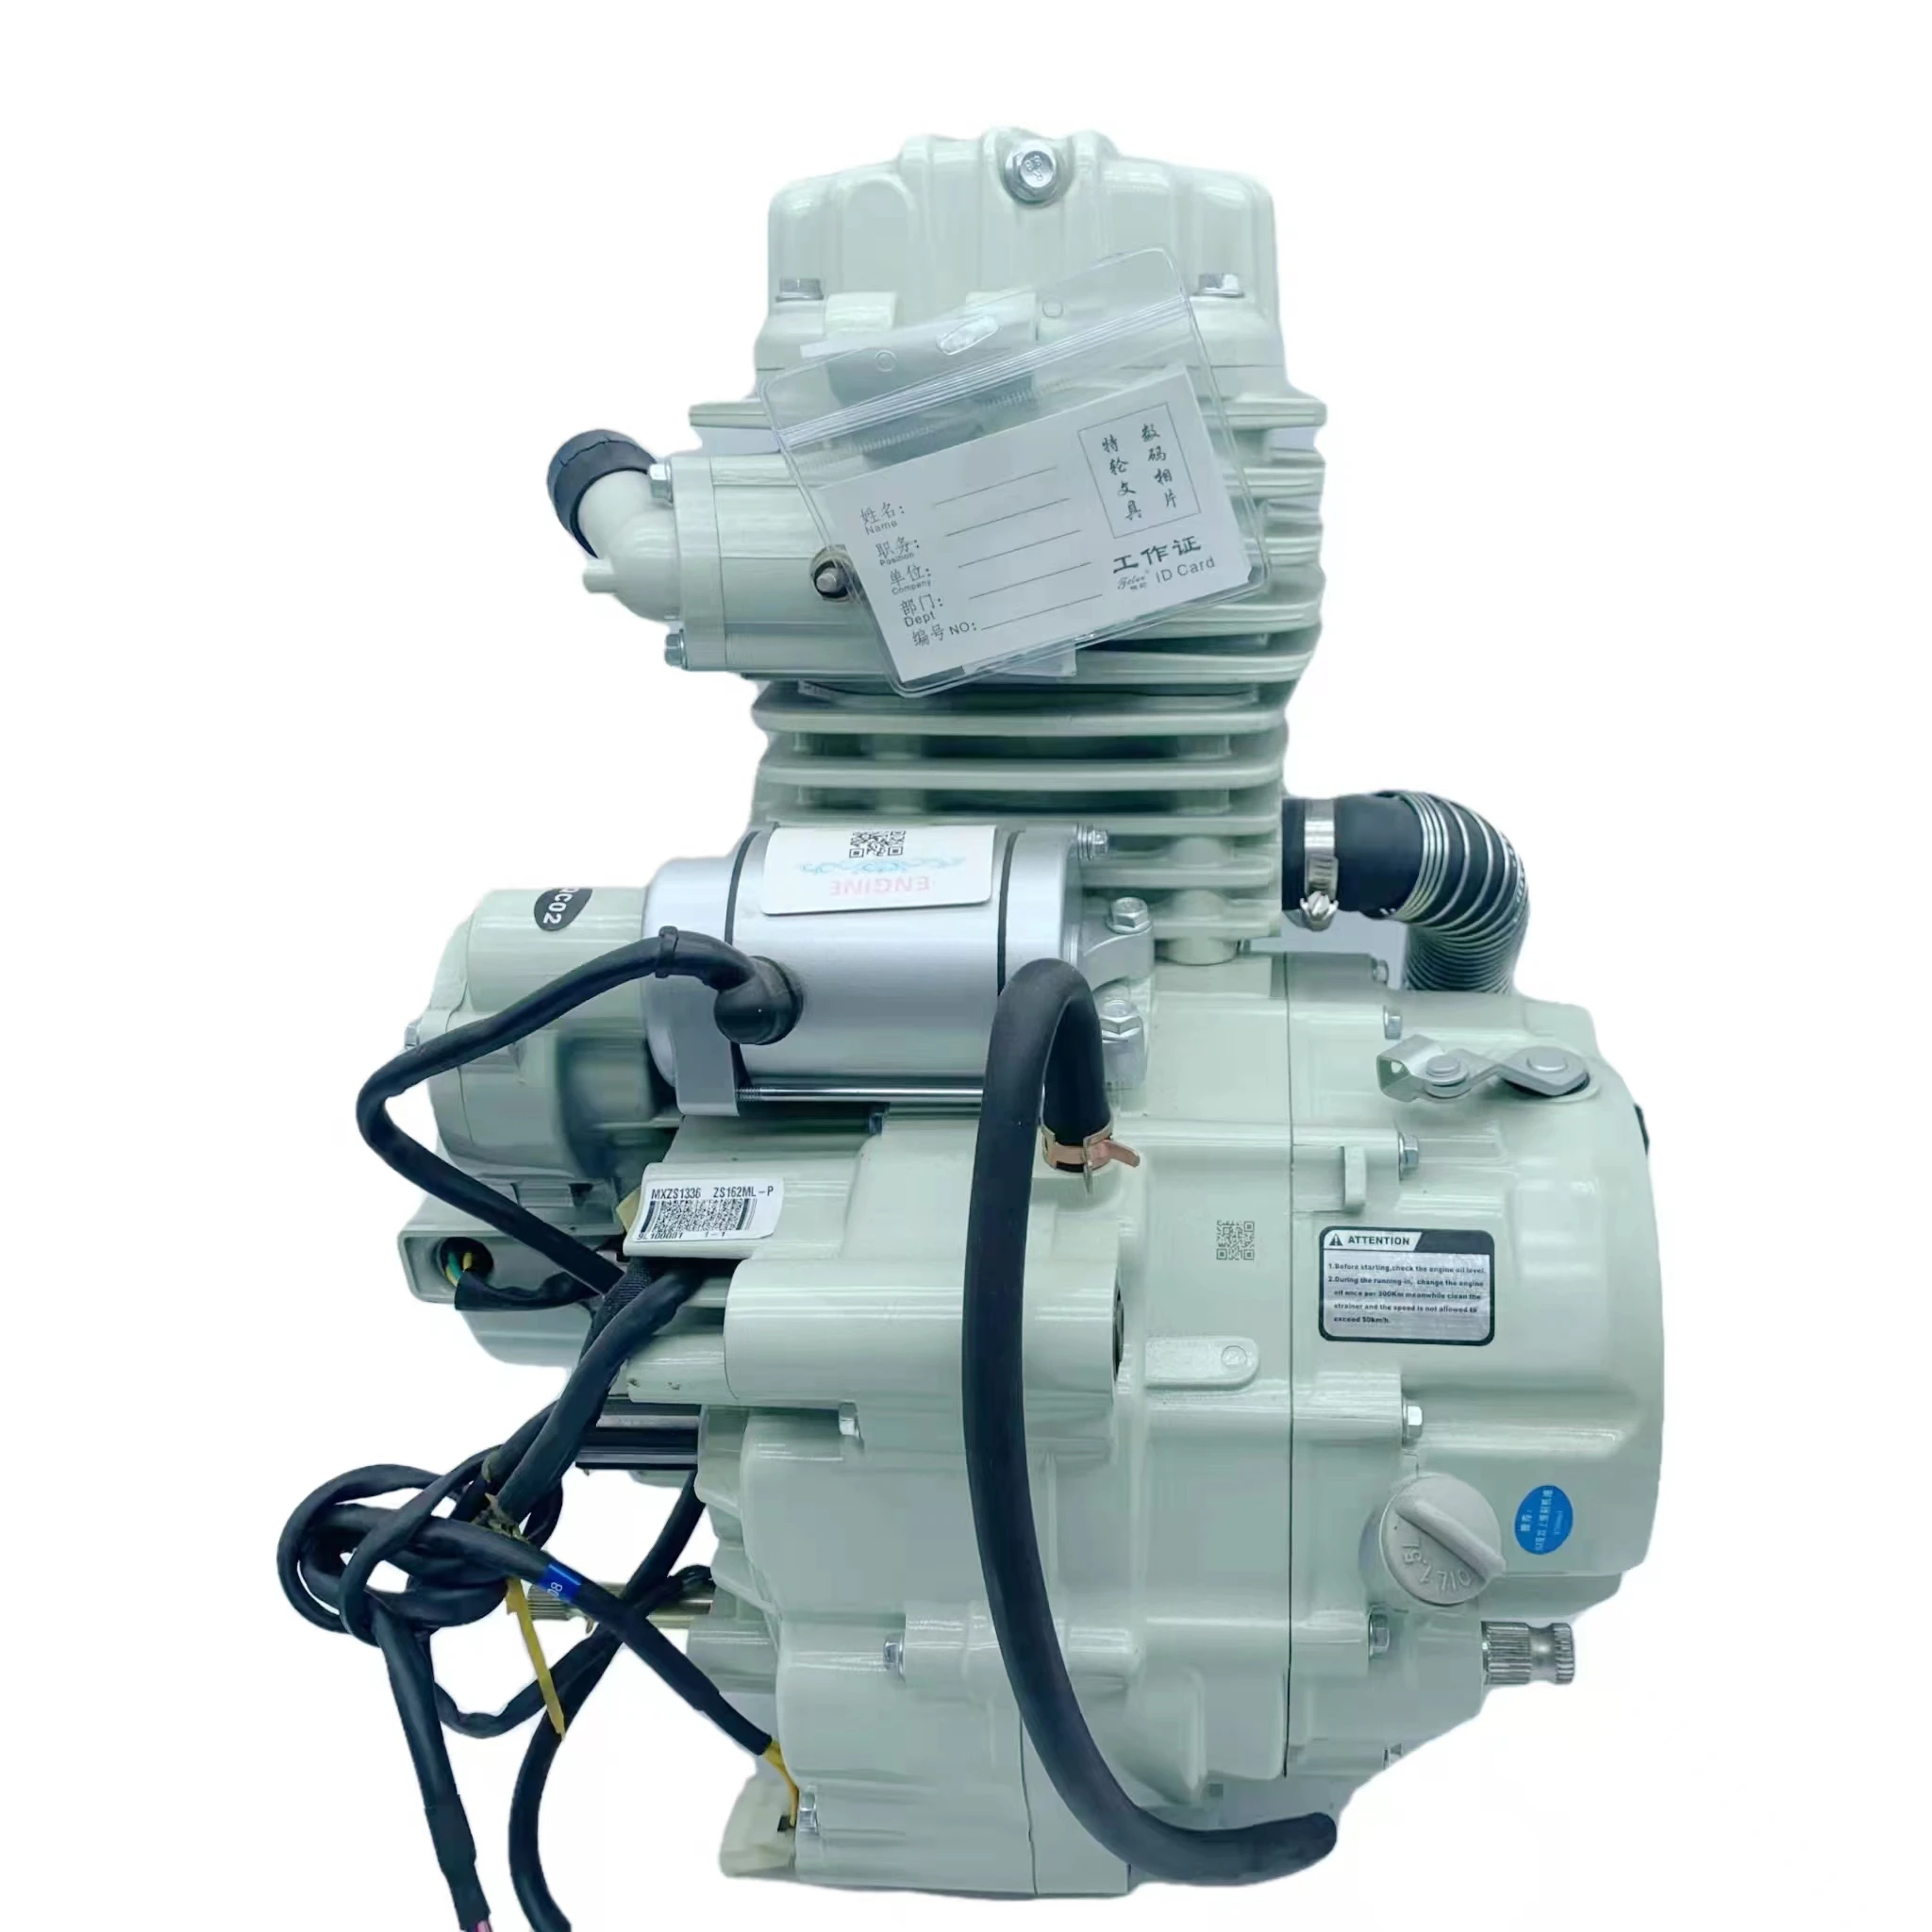 Zongshen Weifeng 200/250/300cc water-cooled engine motorcycle 200cc Zongshen engine, Zongshen 250cc motorcycle engine assembly